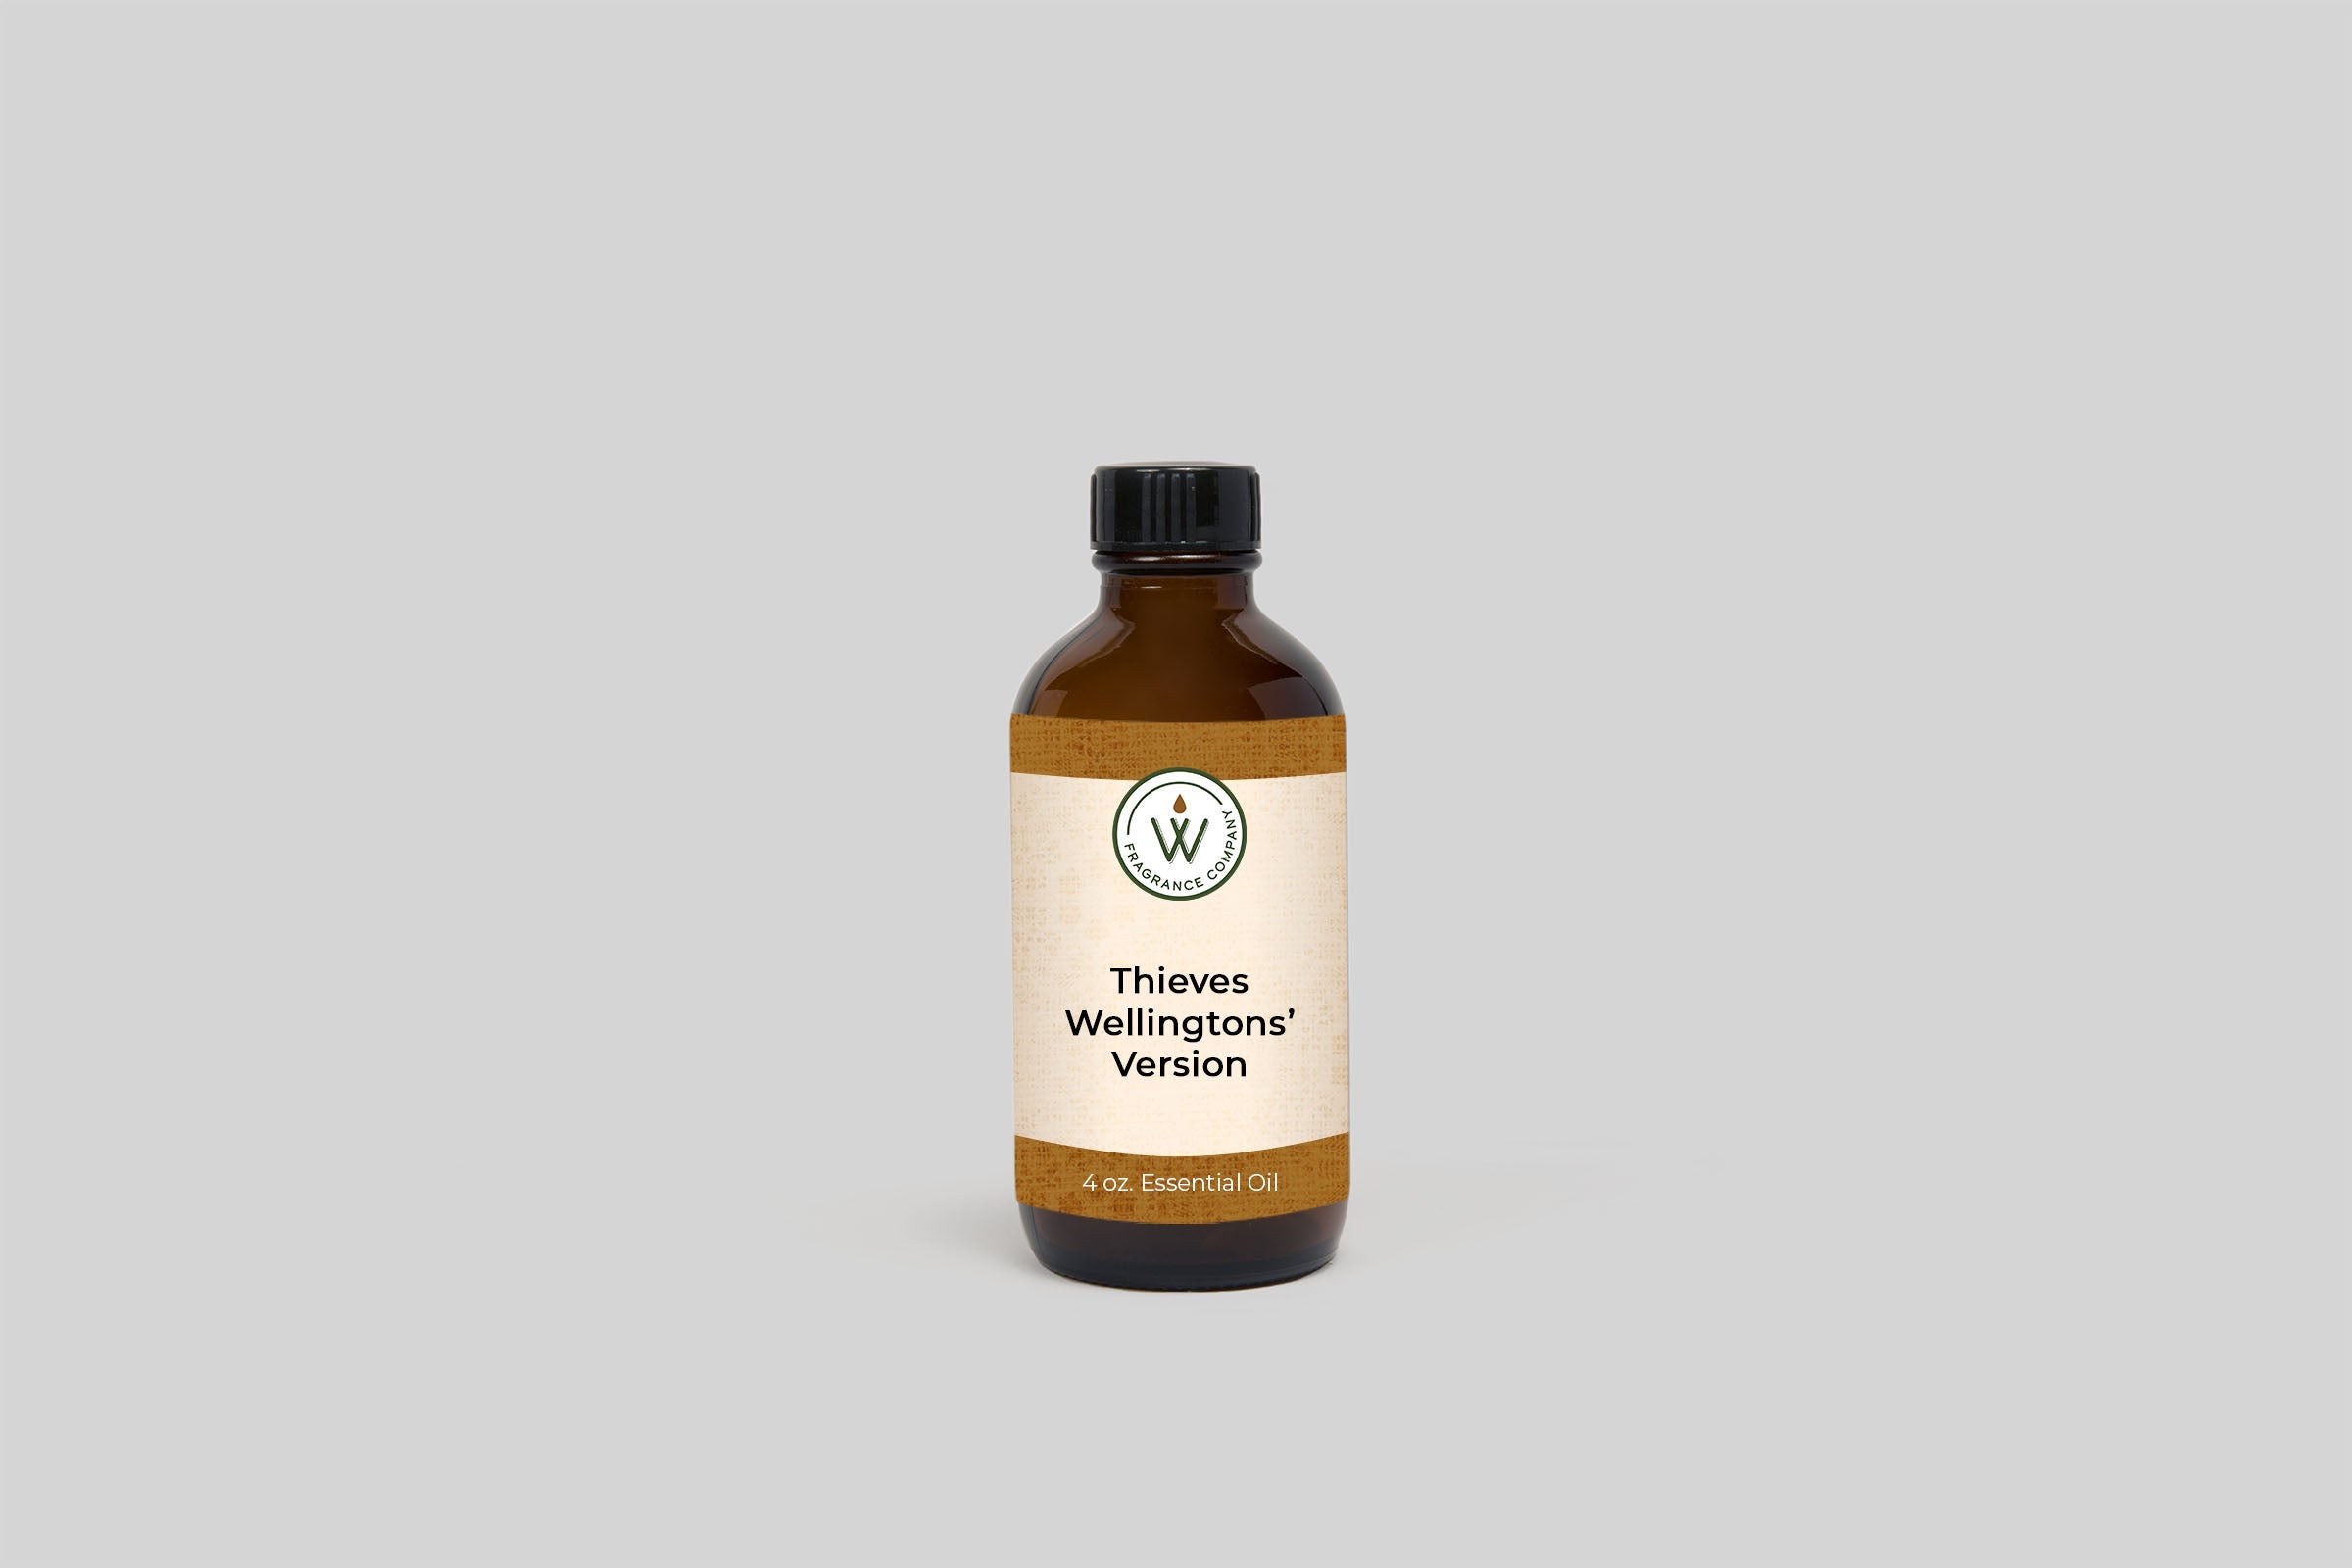 Thieves Essential Oil Wellingtons' Version